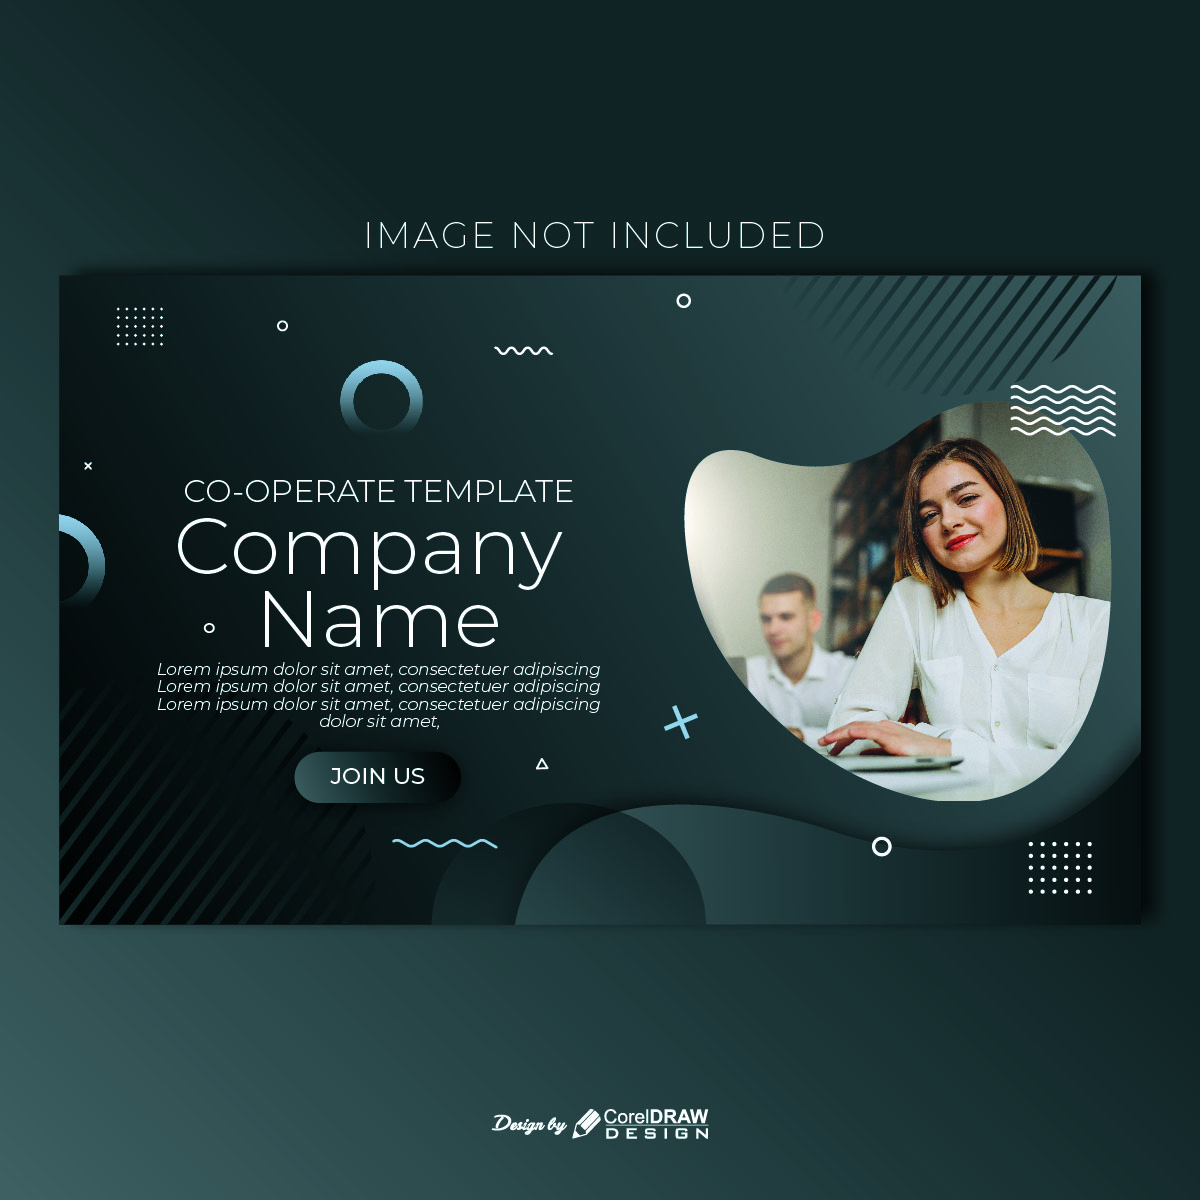 Abstract Professional Co-operate Banner Template